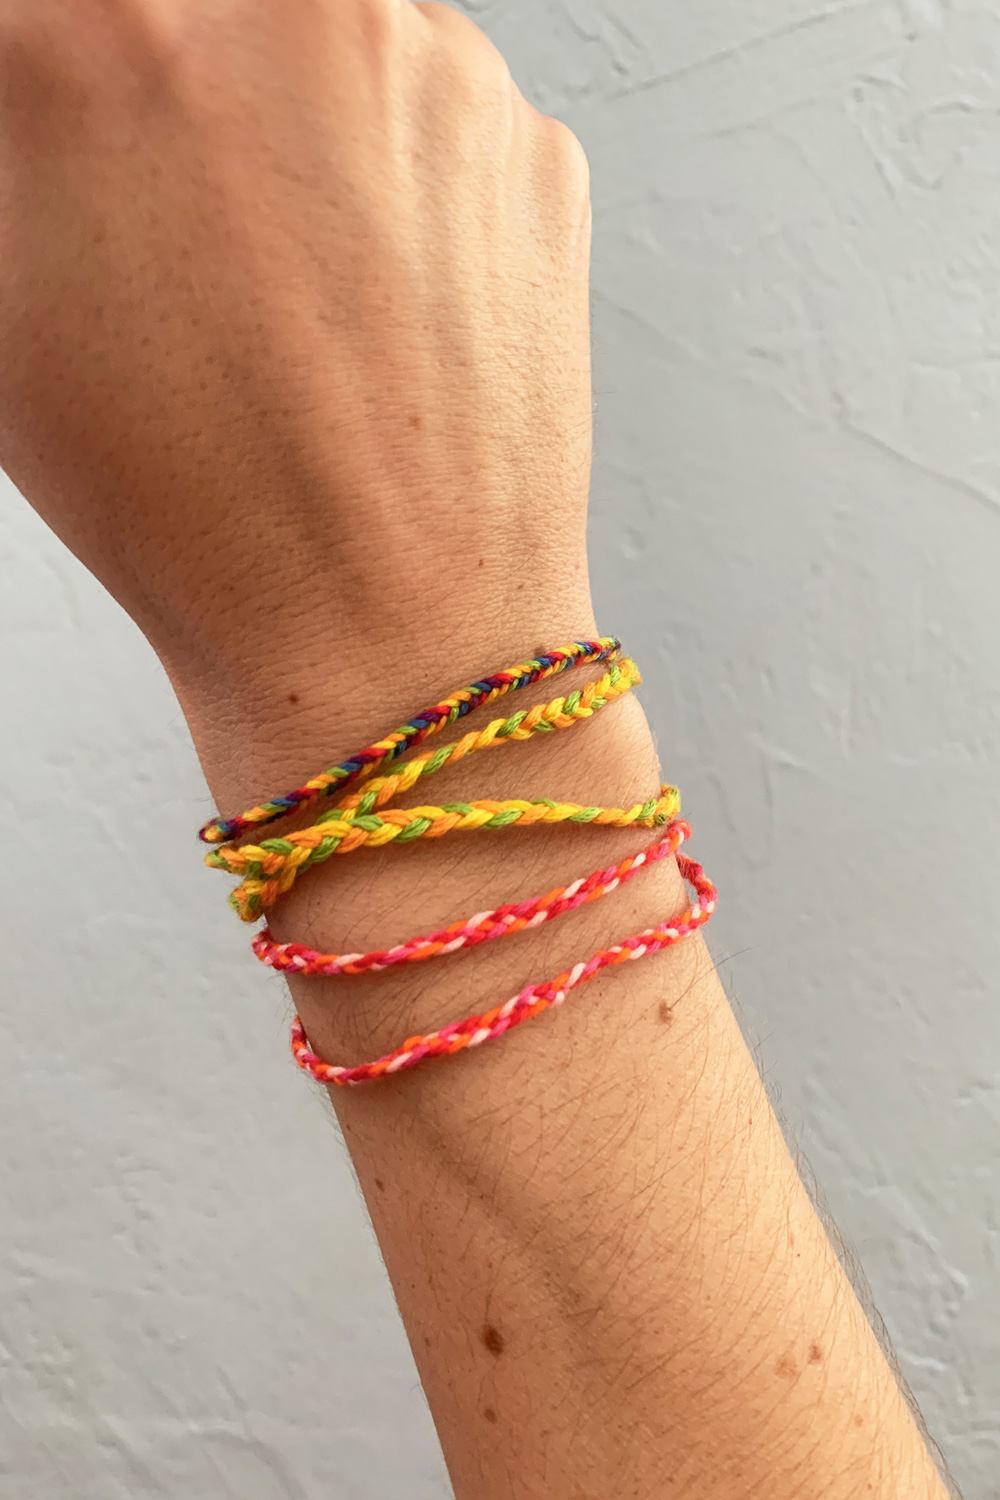 Multi-colored Woven Friendship Bracelets Handmade of Embroidery Bright  Thread with Knots on Light Gray Background Stock Image - Image of creative,  bangle: 193788105